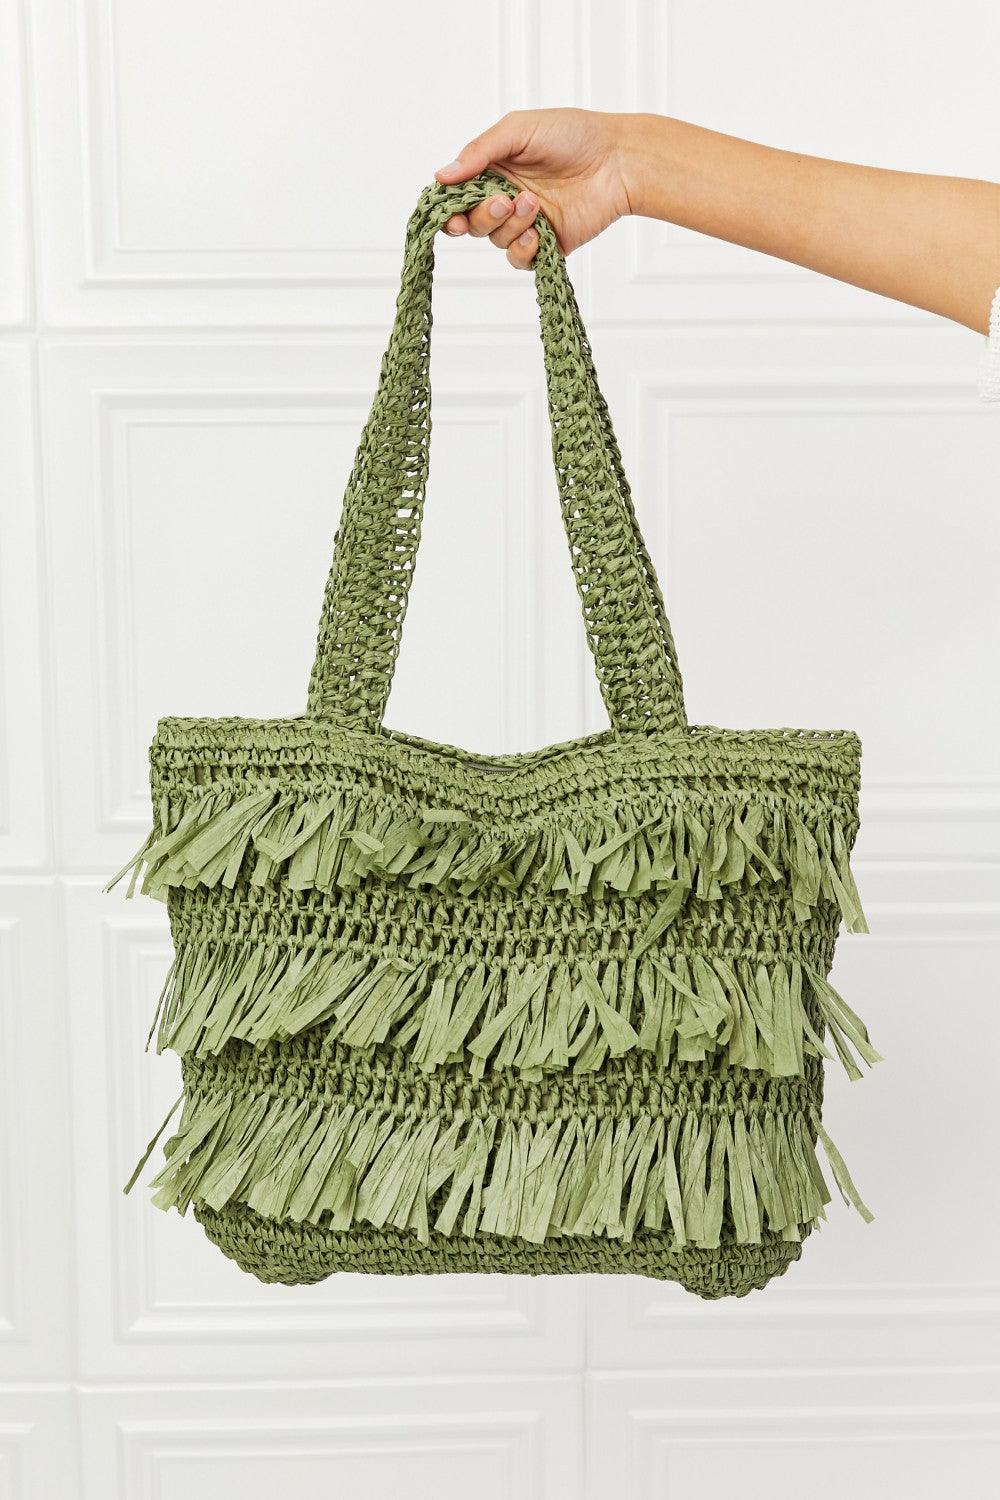 Fame The Last Straw Fringe Straw Tote Bag - The Fiery Jasmine